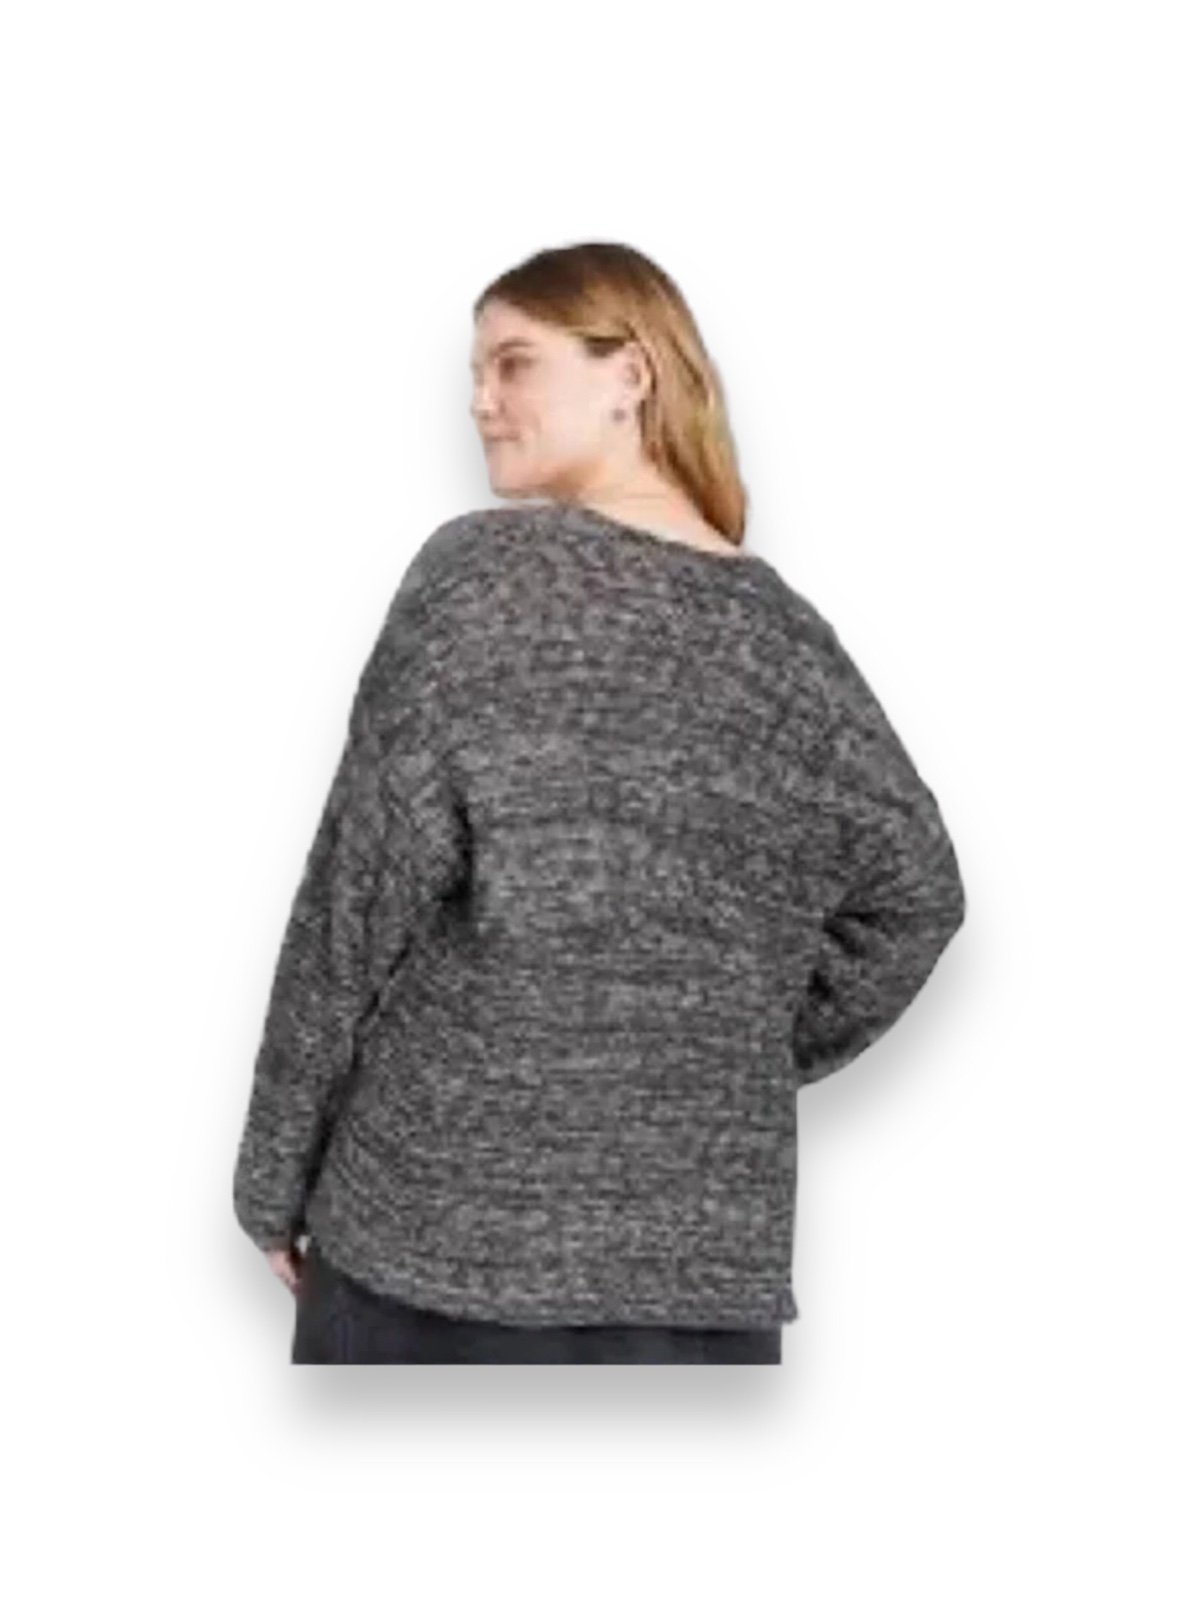 Discounted Universal Thread Women’s V Neck Pullover Sweater, Gray, size XL kuxqtKve6 just for you